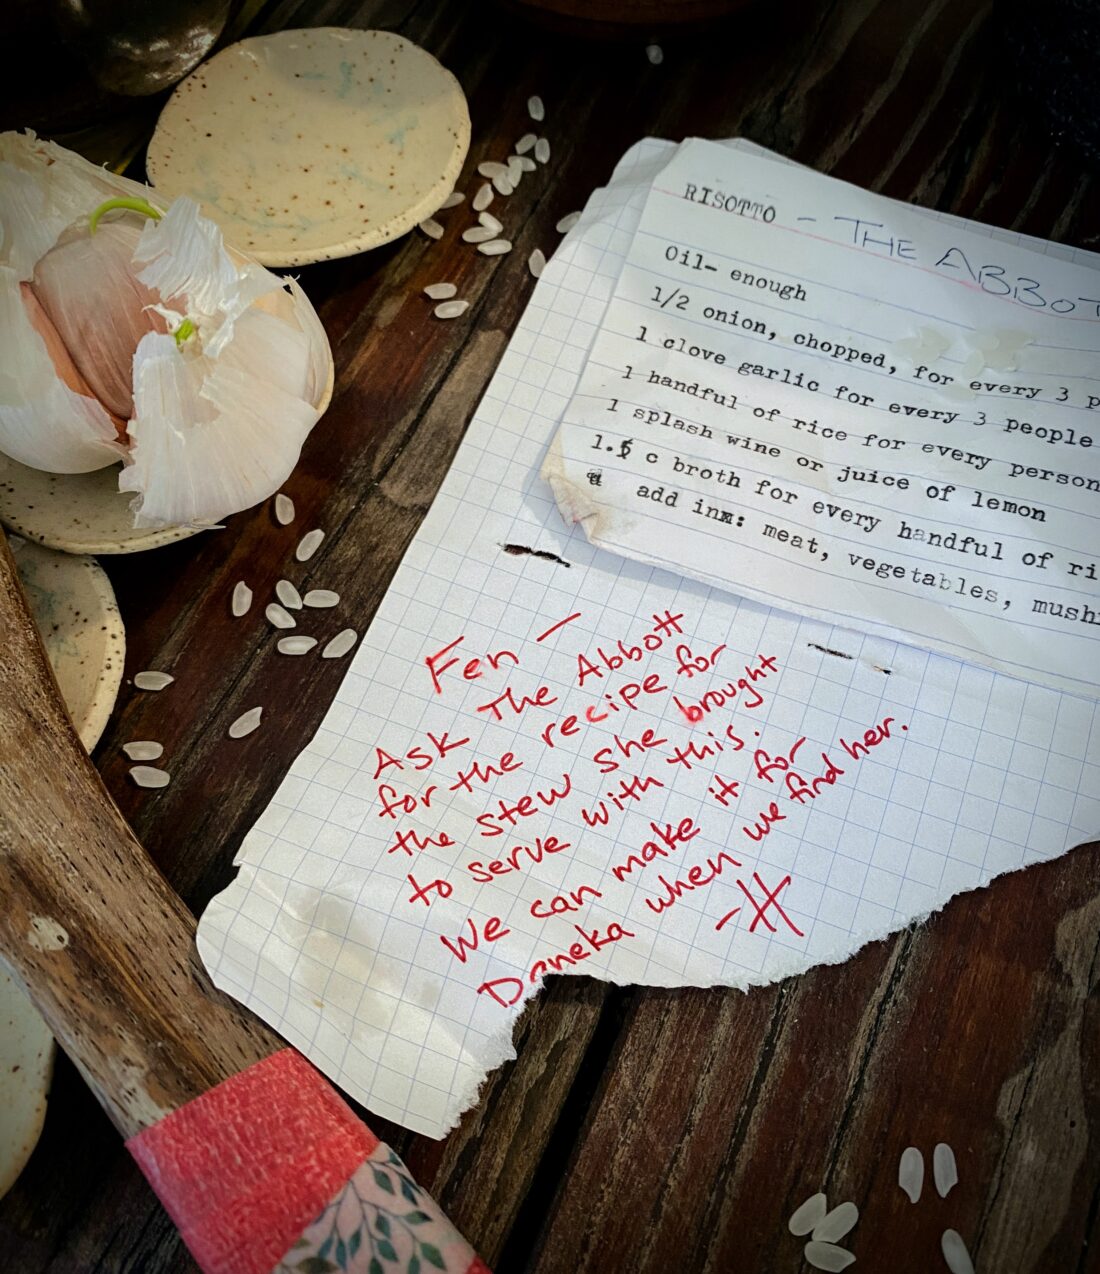 A recipe card, typewritten on an index card, stapled to a torn sheet of notebook paper with a typewritten recipe on it. Both are weathered, torn, stained, and annotated. The card is on top of sturdy, well-worn wood, and is surrounded by a repaired wooden spoon, small dishes holding sprouted garlic, and some scattered short-grain rice. Visible recipe text is as follows (all is typewritten unless otherwise indicated. Recipe card cuts off at the edge of the image; see story text for recipe in full): On the recipe card: Risotto – a handwritten annotation adds “The Abbott” Oil—enough ½ onion, chopped, for every 3 1 clove garlic for every 3 people 1 handful of rice for every person 1 splash wine or juice of 1 lemon 1½ cups broth for every handful of ri Add in: meat, vegetables, mush The recipe page beneath does not have visible recipe text. A handwritten note in red marker, in a unique handwriting, says: “Fen – Ask The Abbott for the recipe for the stew she brought to serve with this. We can make it for Daneka when we find her. -H”